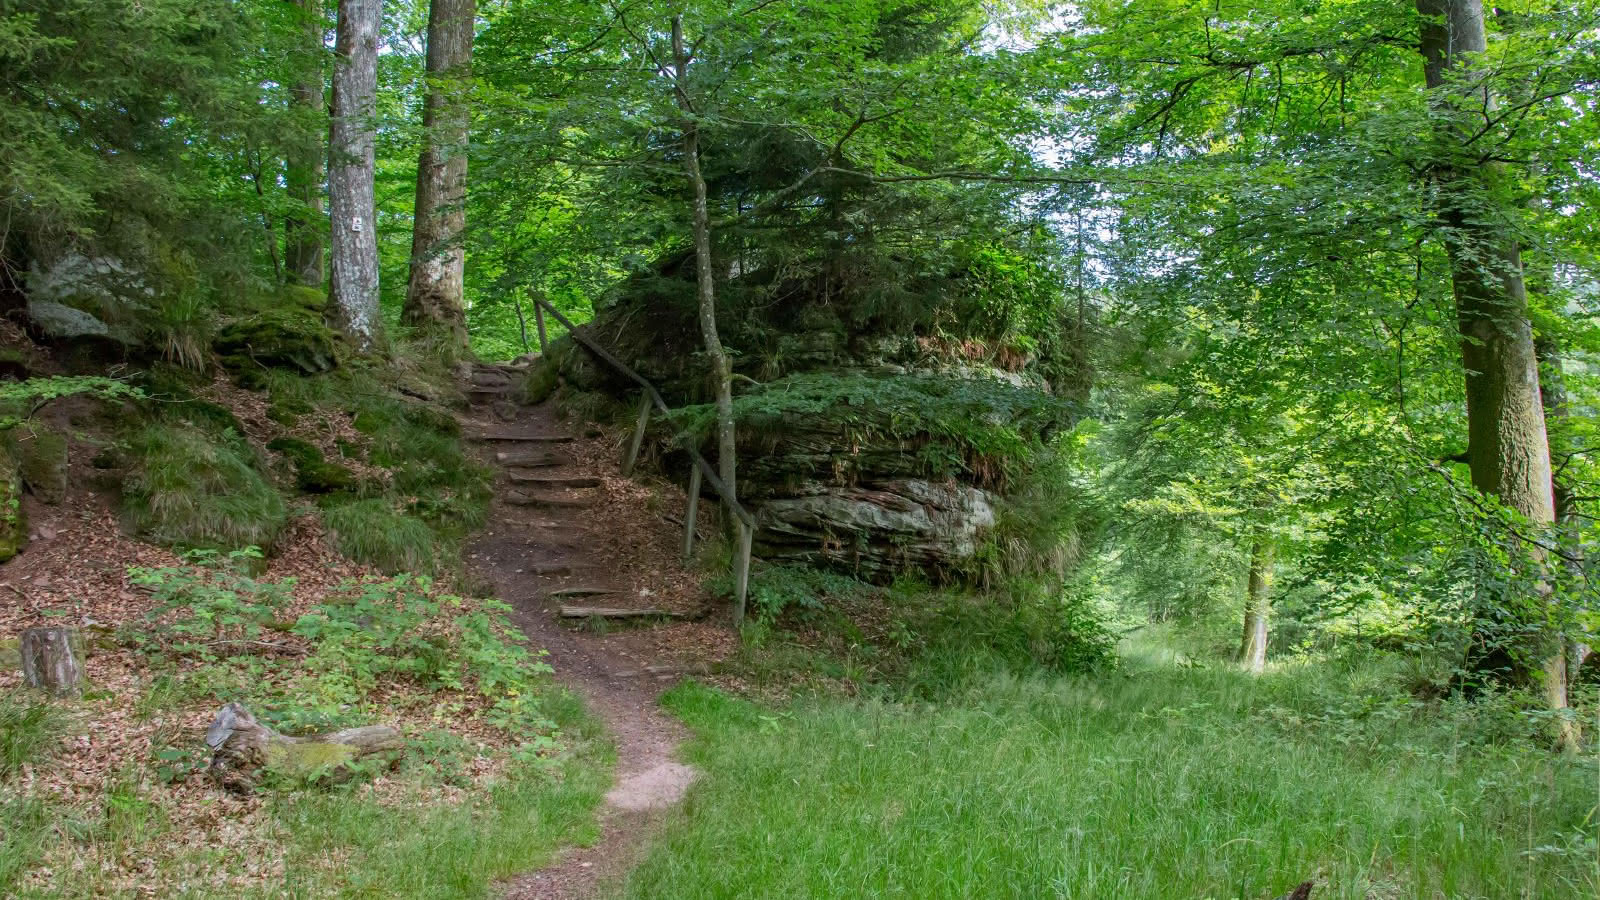 Trail from Imsthal to Loosthal - La Petite Pierre | Visit Alsace